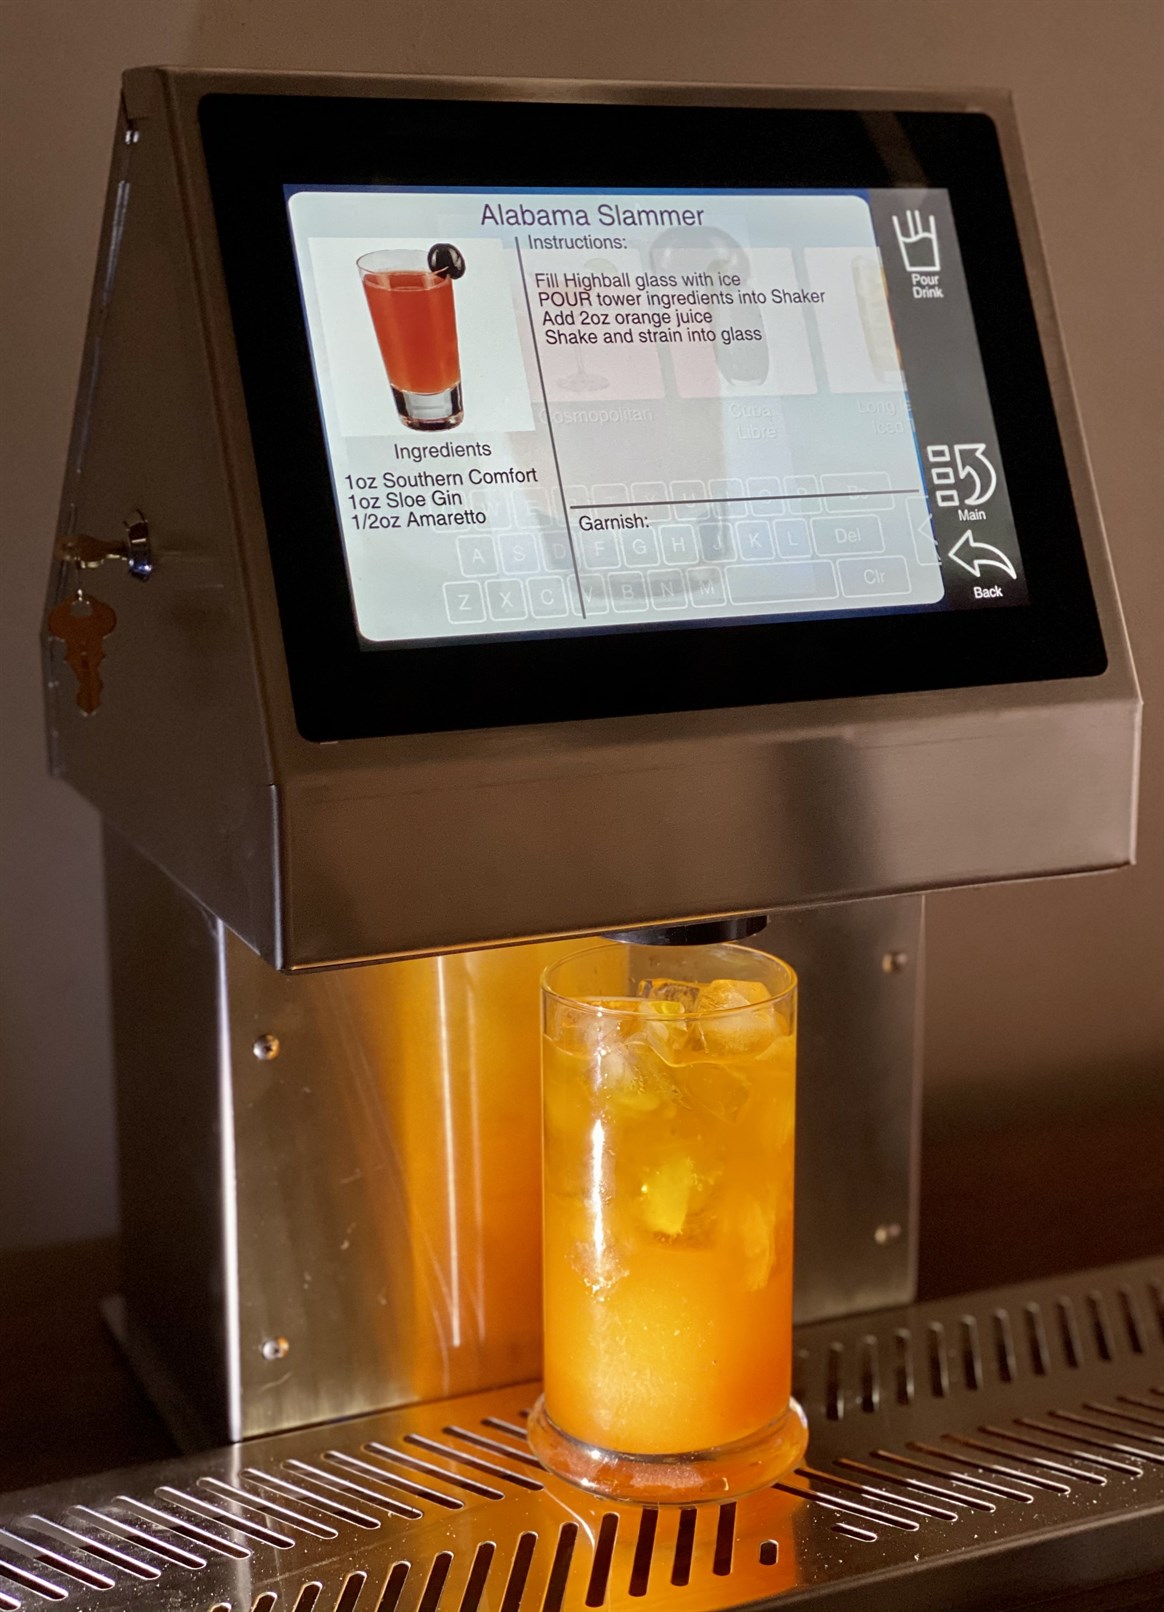 Cocktail Service Station, Liquor Dispensing Systems